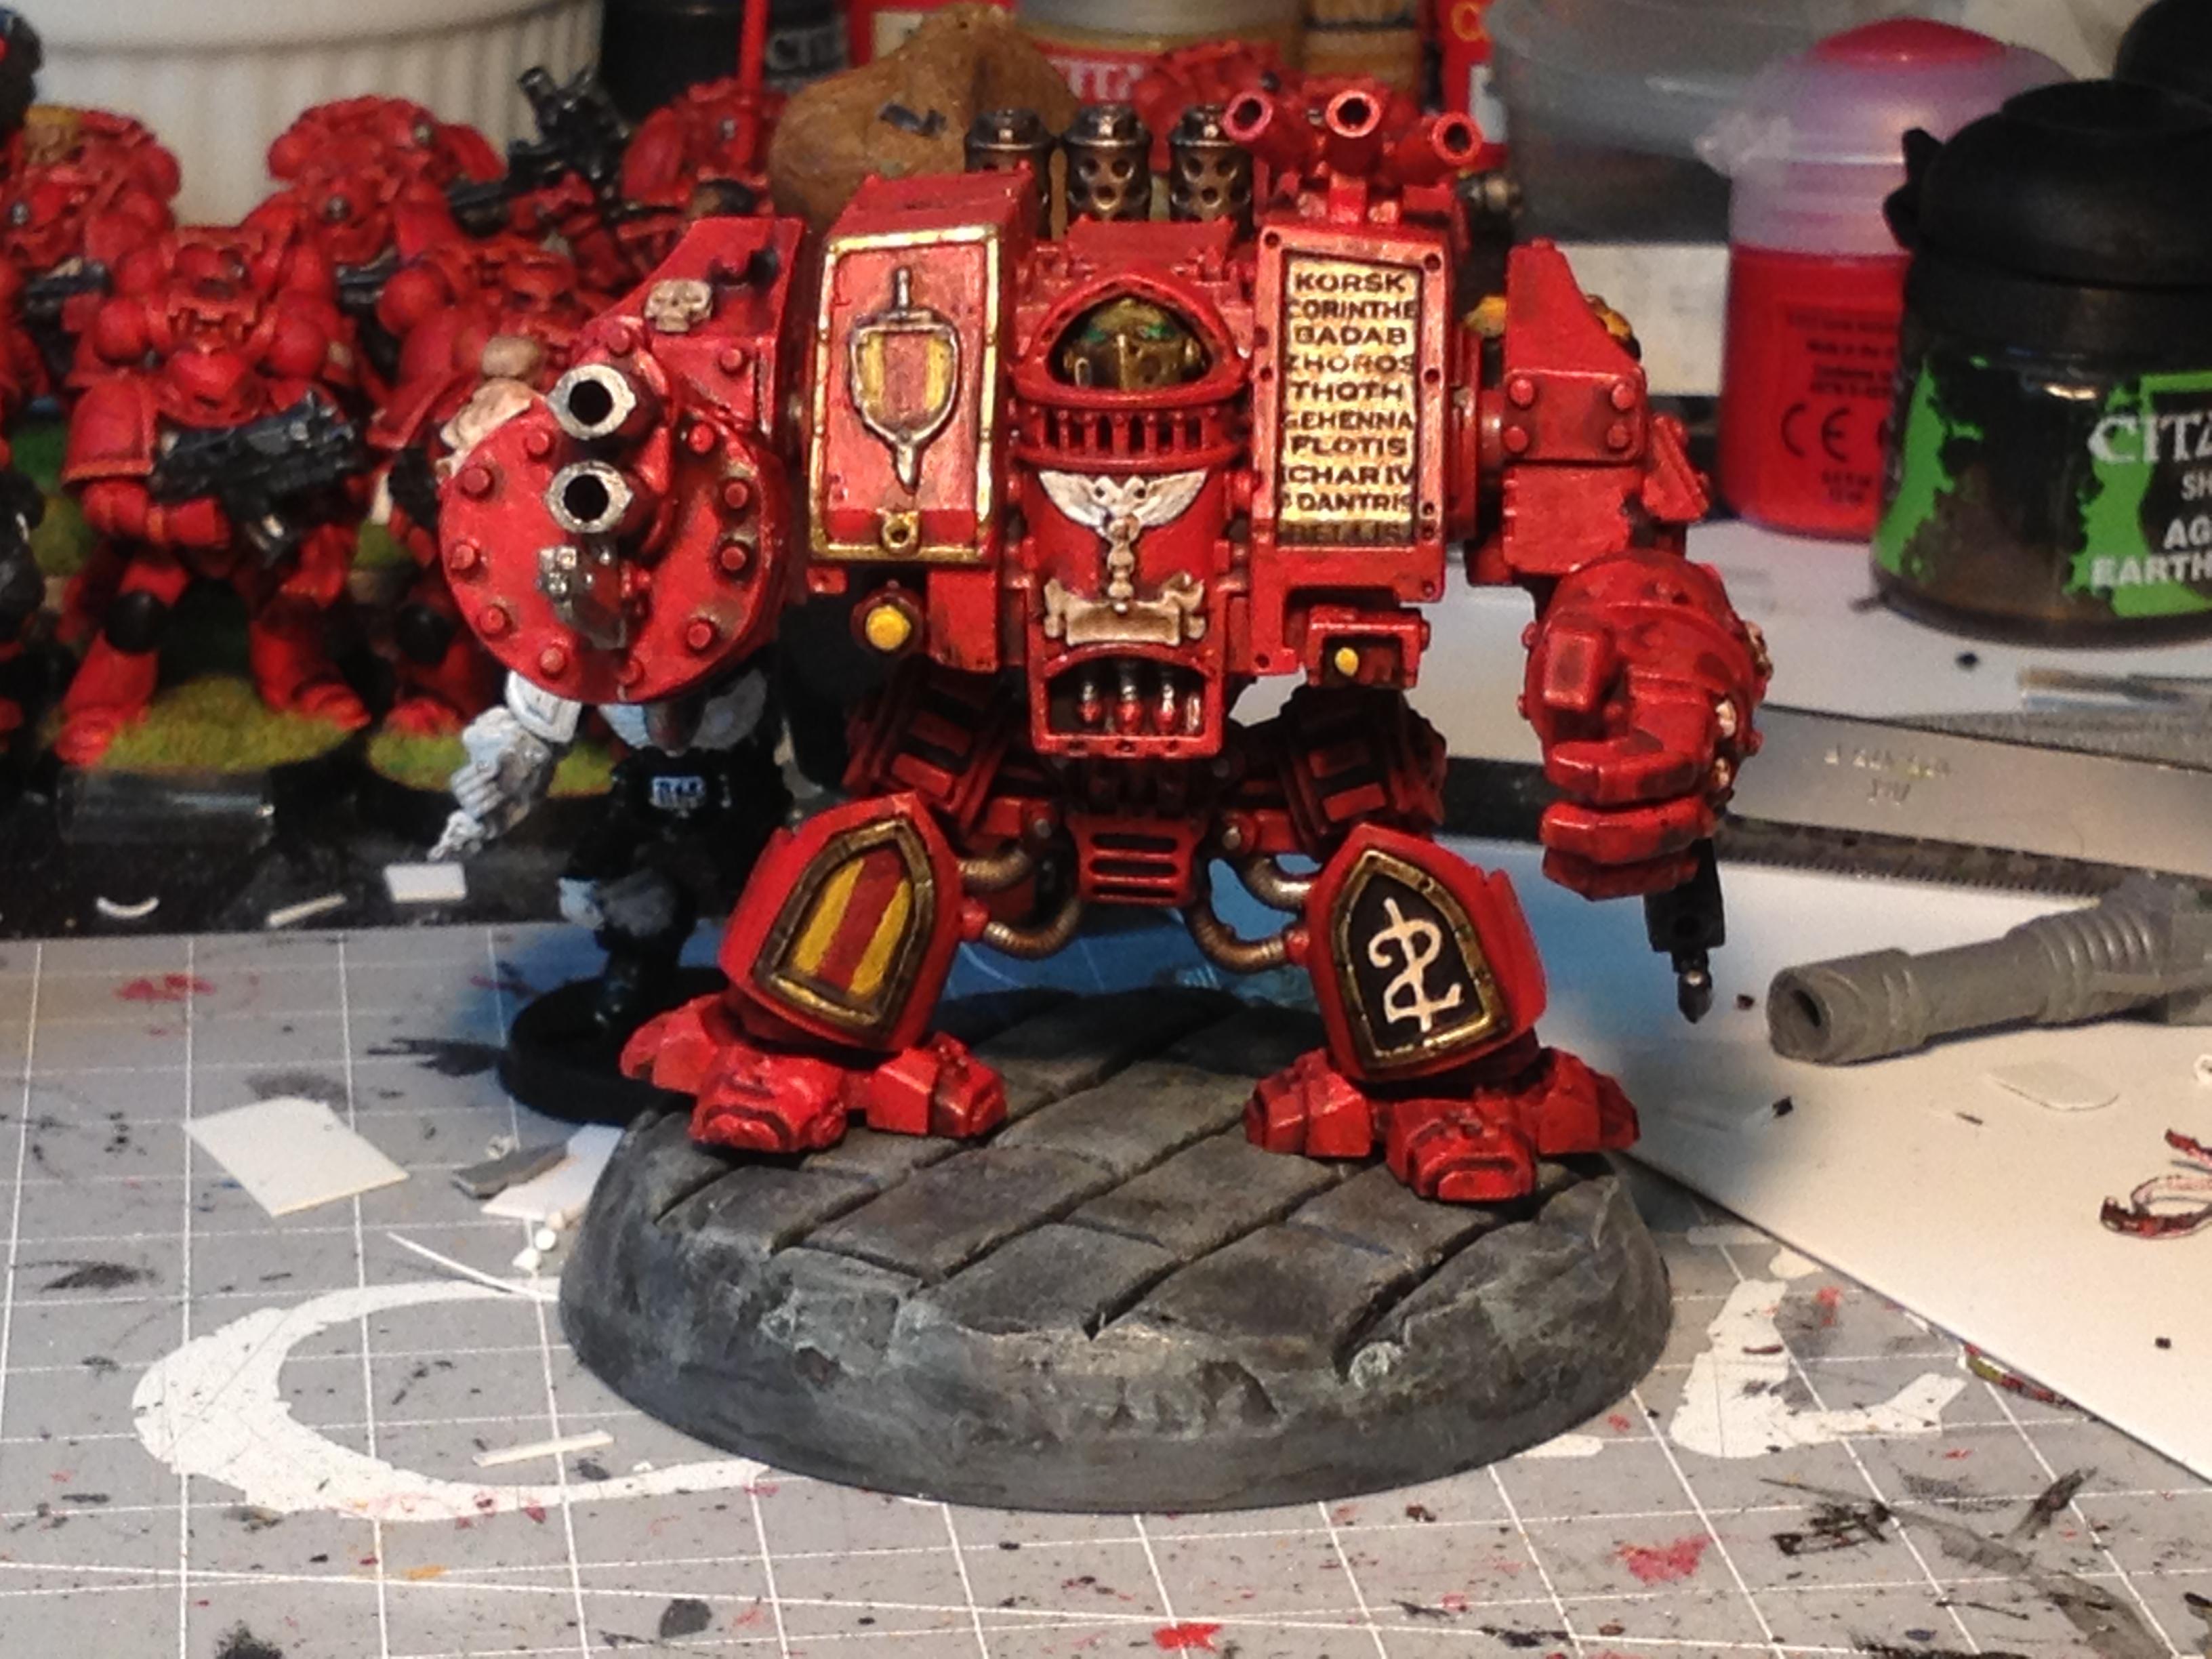 Blood Angels, Dreadnought, Space Marines